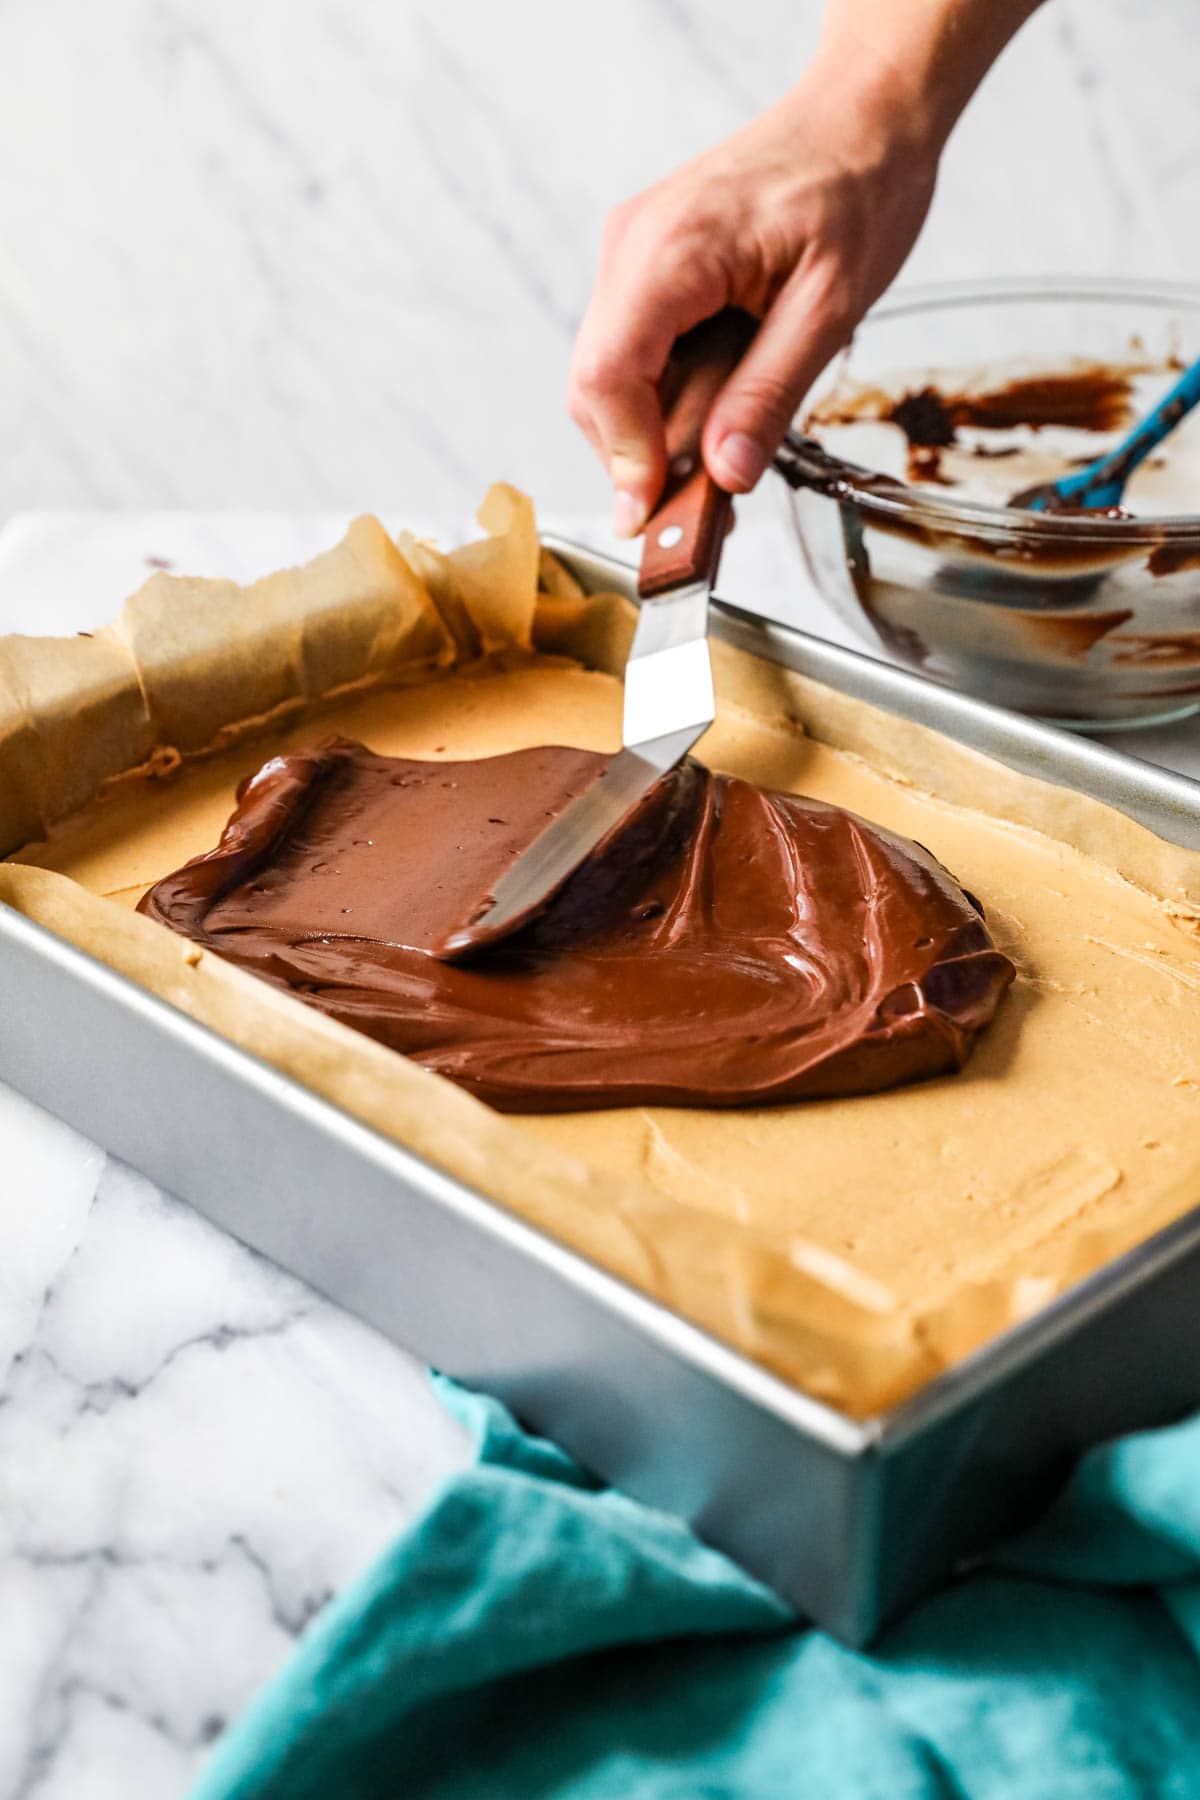 Chocolate being spread over peanut butter fudge with an offset spatula.